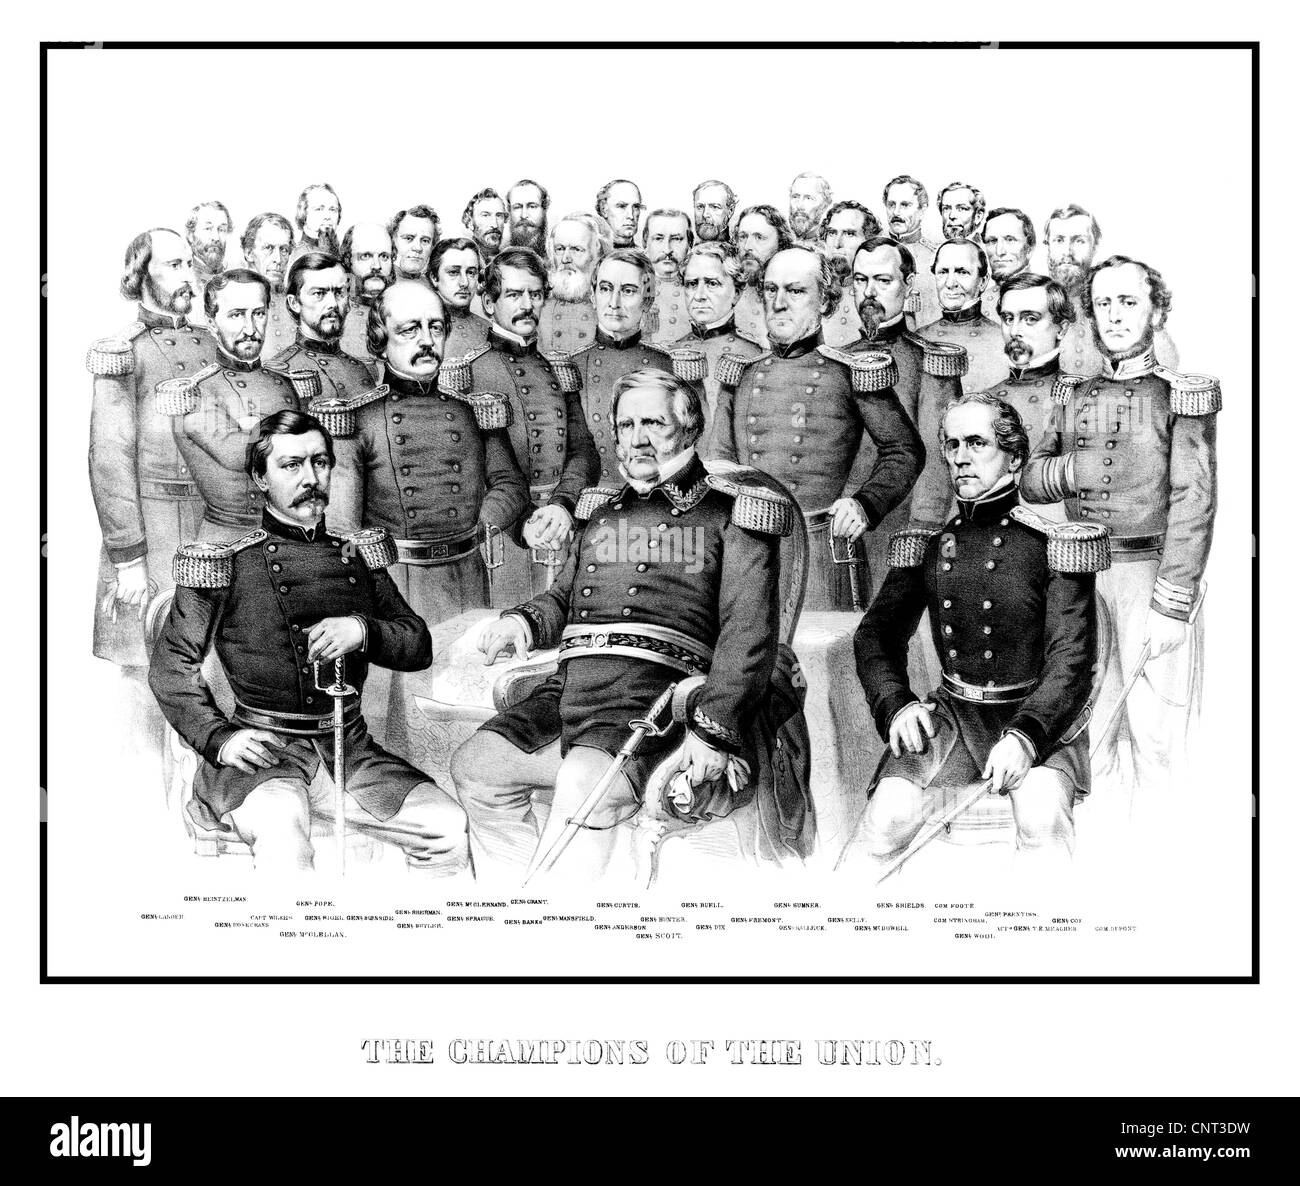 Vintage American Civil War print featuring a group portrait of early war Union Generals. Stock Photo